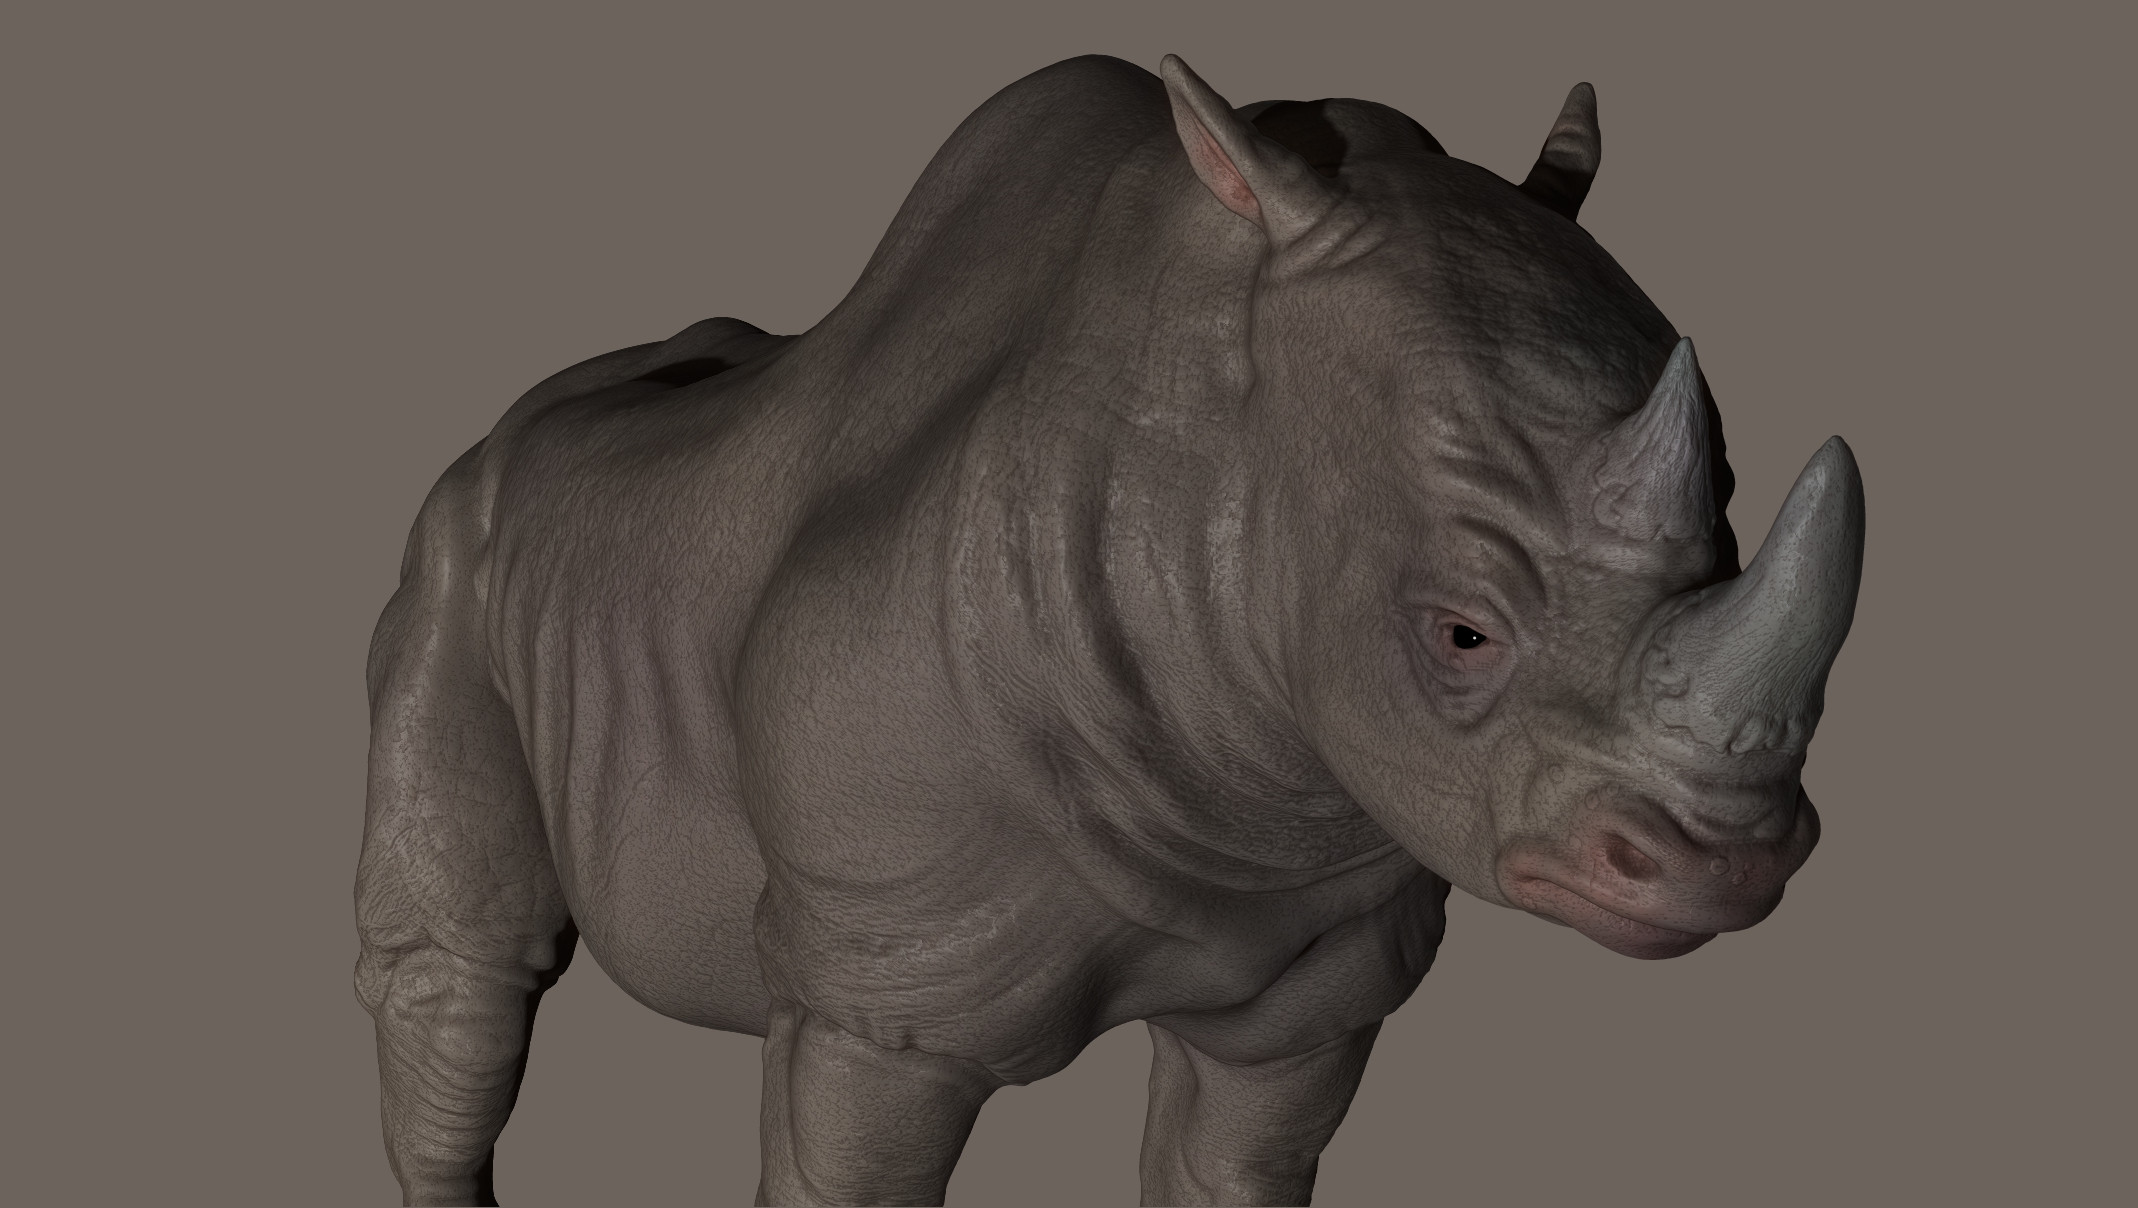 Front view of the High poly model.